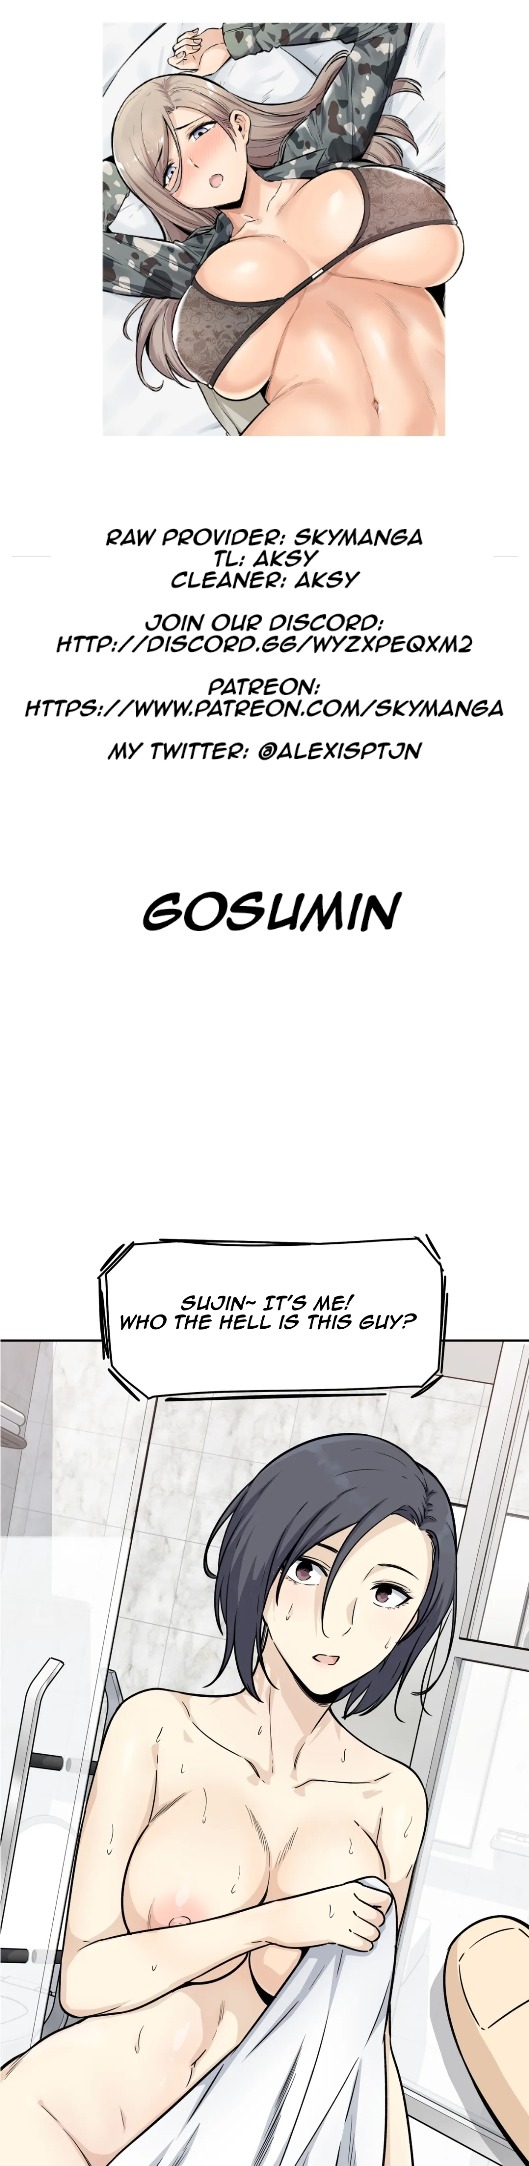 Gomusin - Chapter 2 Page 1